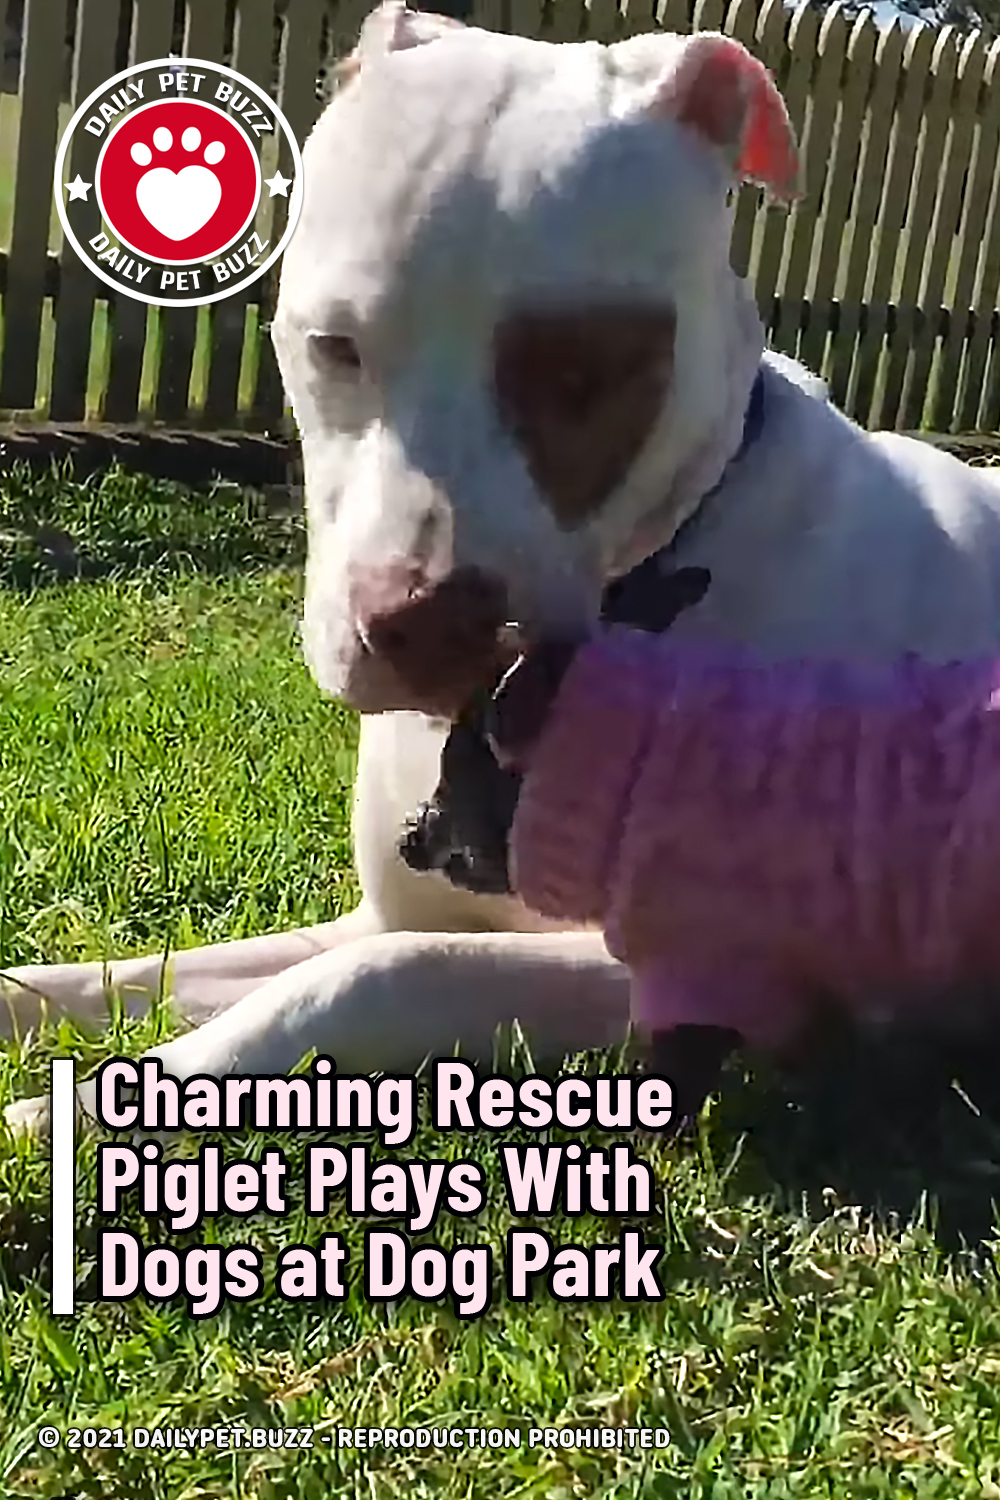 Charming Rescue Piglet Plays With Dogs at Dog Park